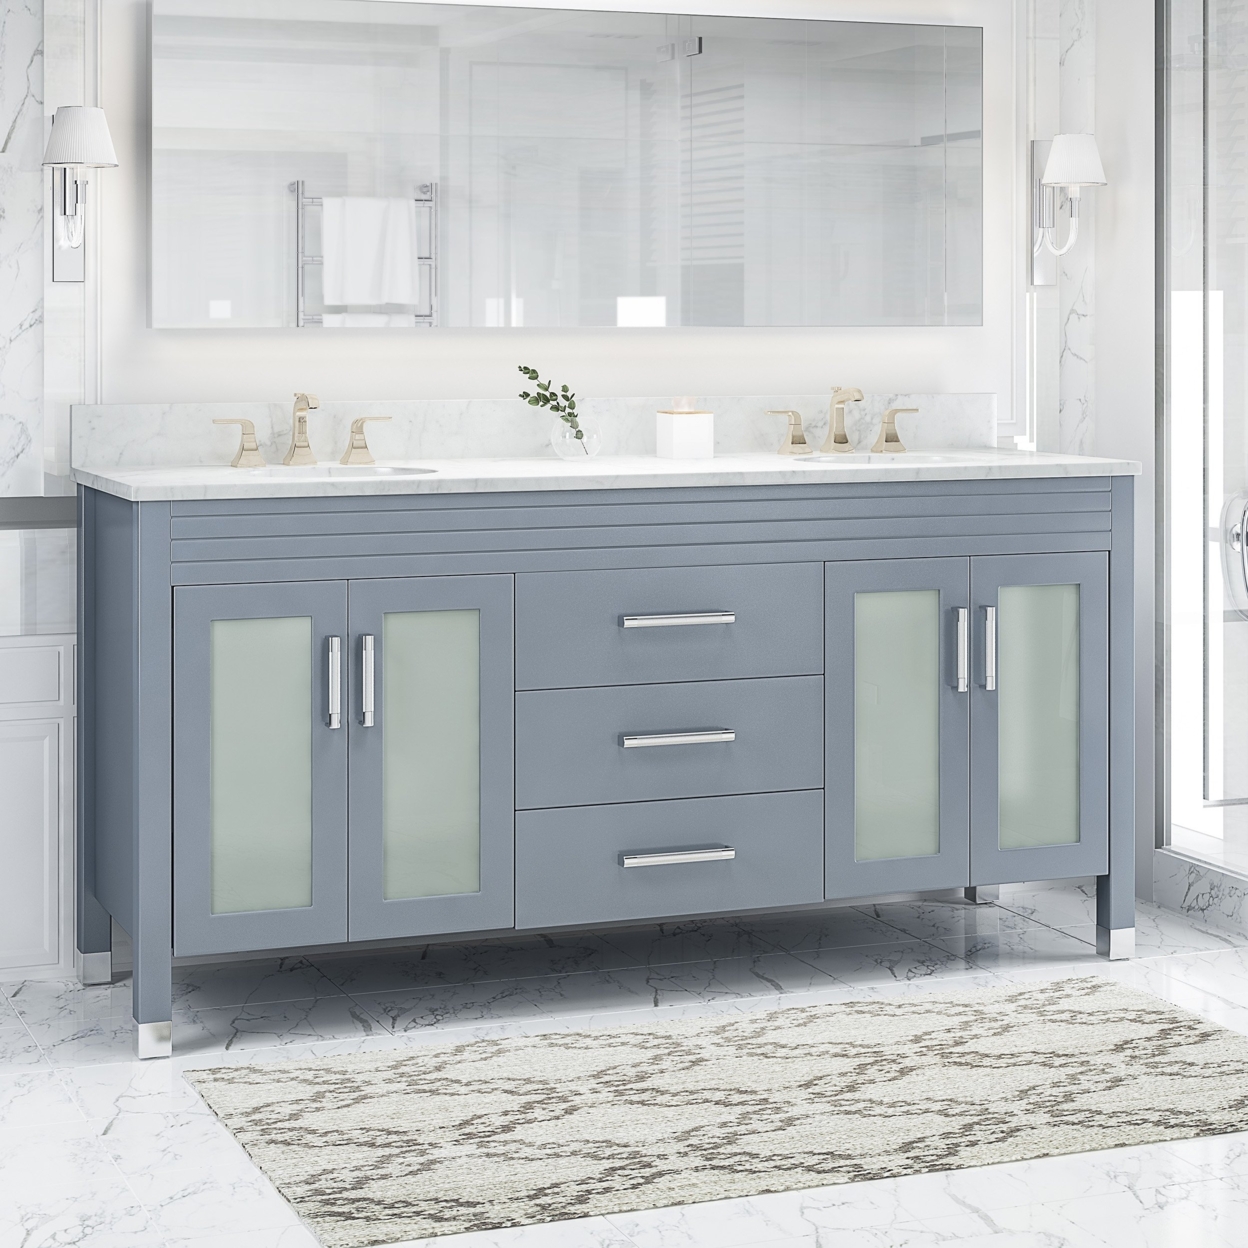 Holdame Contemporary 72 Wood Bathroom Vanity (Counter Top Not Included) - White